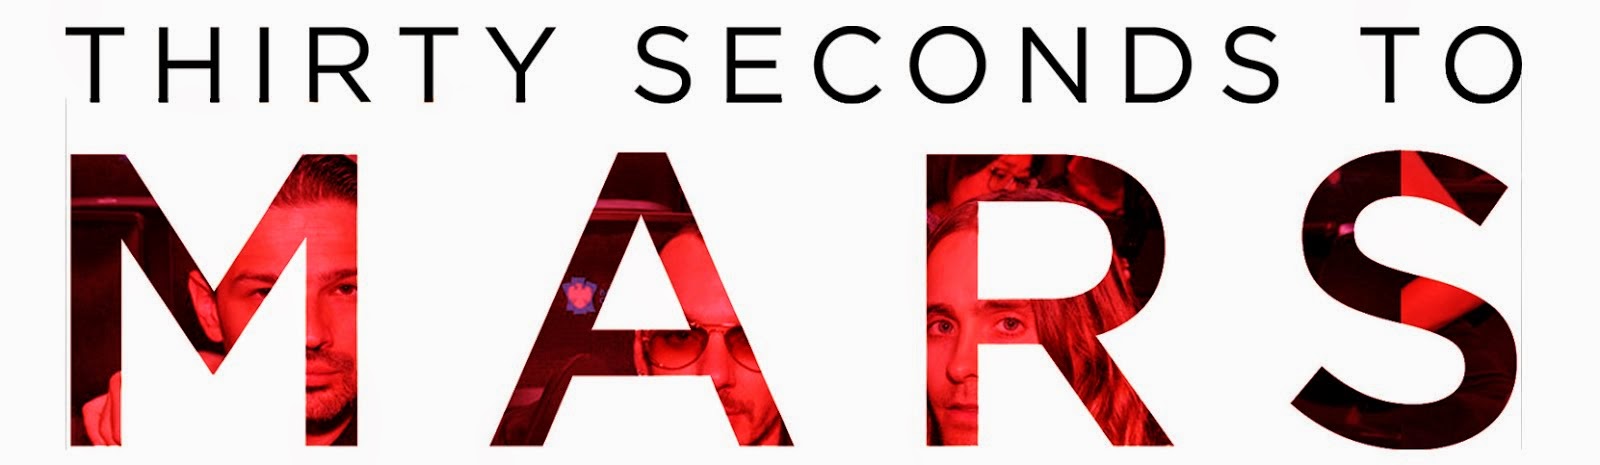 THIRTY SECONDS TO MARS BR